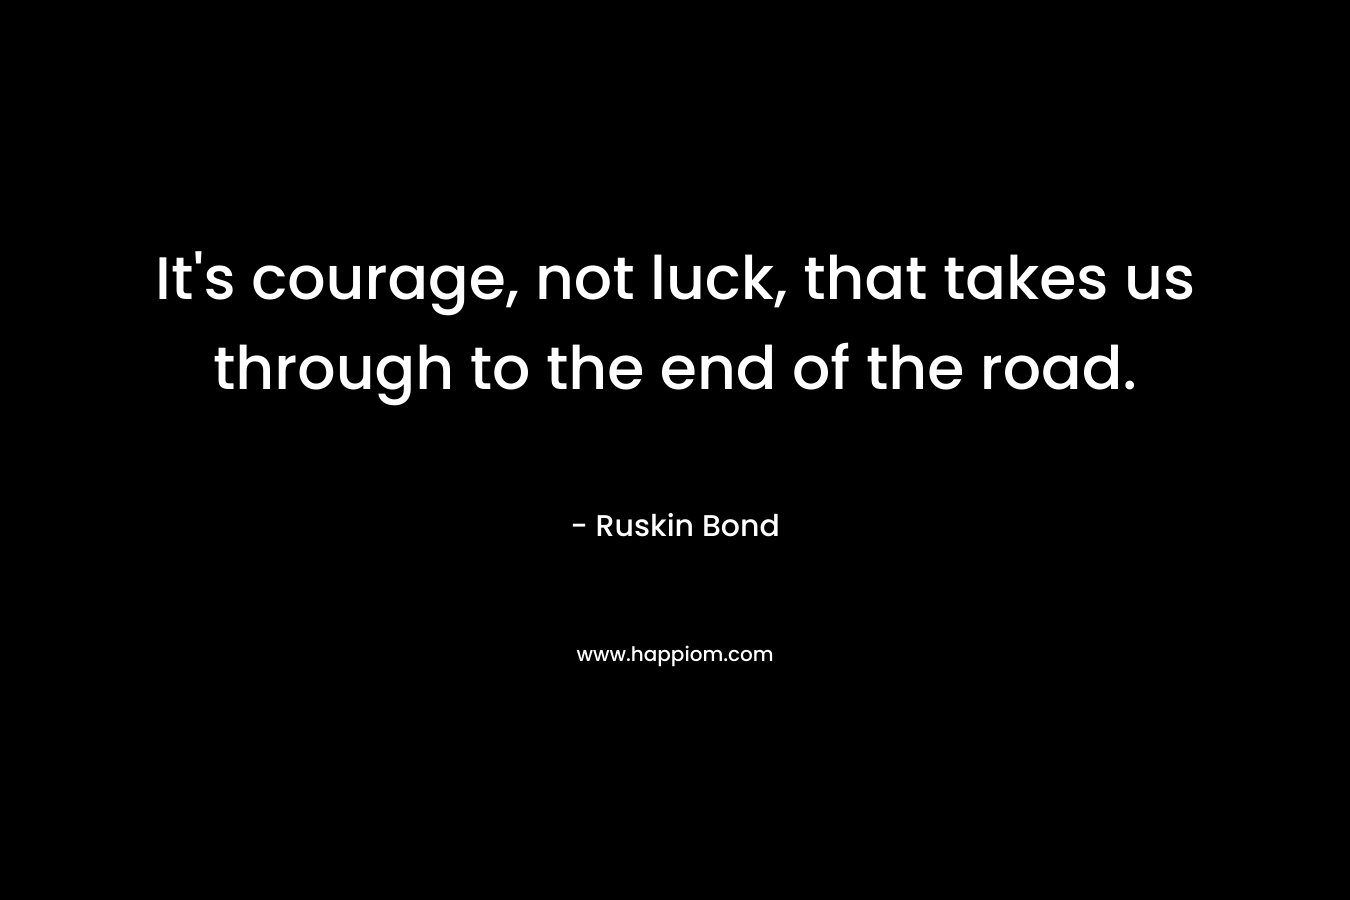 It's courage, not luck, that takes us through to the end of the road.